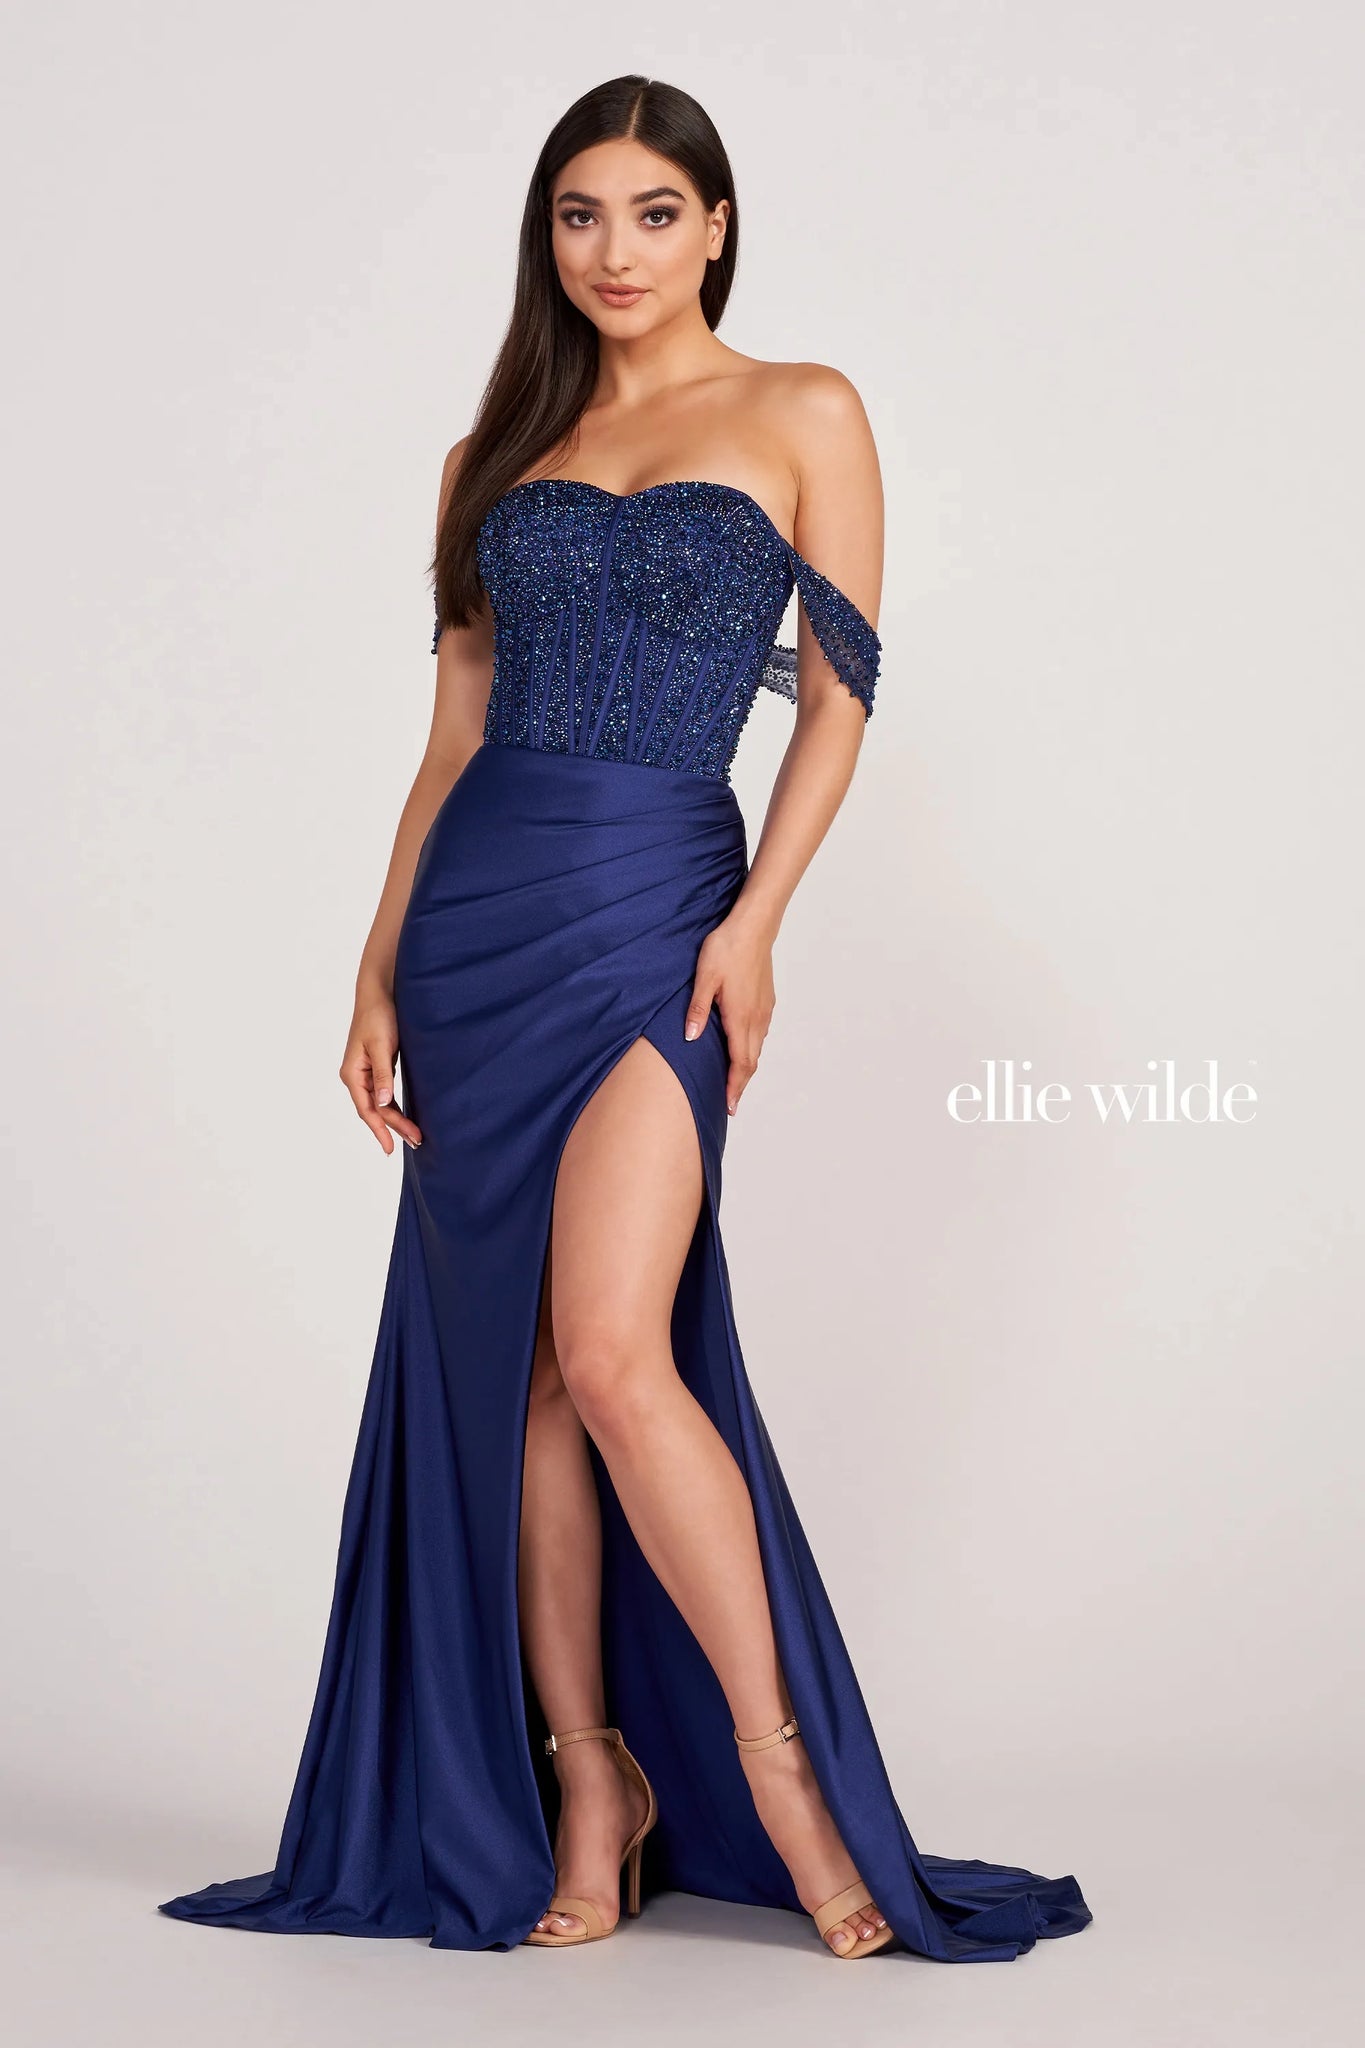 Instantly have all eyes on you in the long style EW34112 by Ellie Wilde. Showing off the flattering sweetheart neckline complimented with off the should cap sleeves. The corset is gorgeously adorned with hand sewn beading and along the skirt changes into a stretch novelty material to hug you effortlessly all night long.